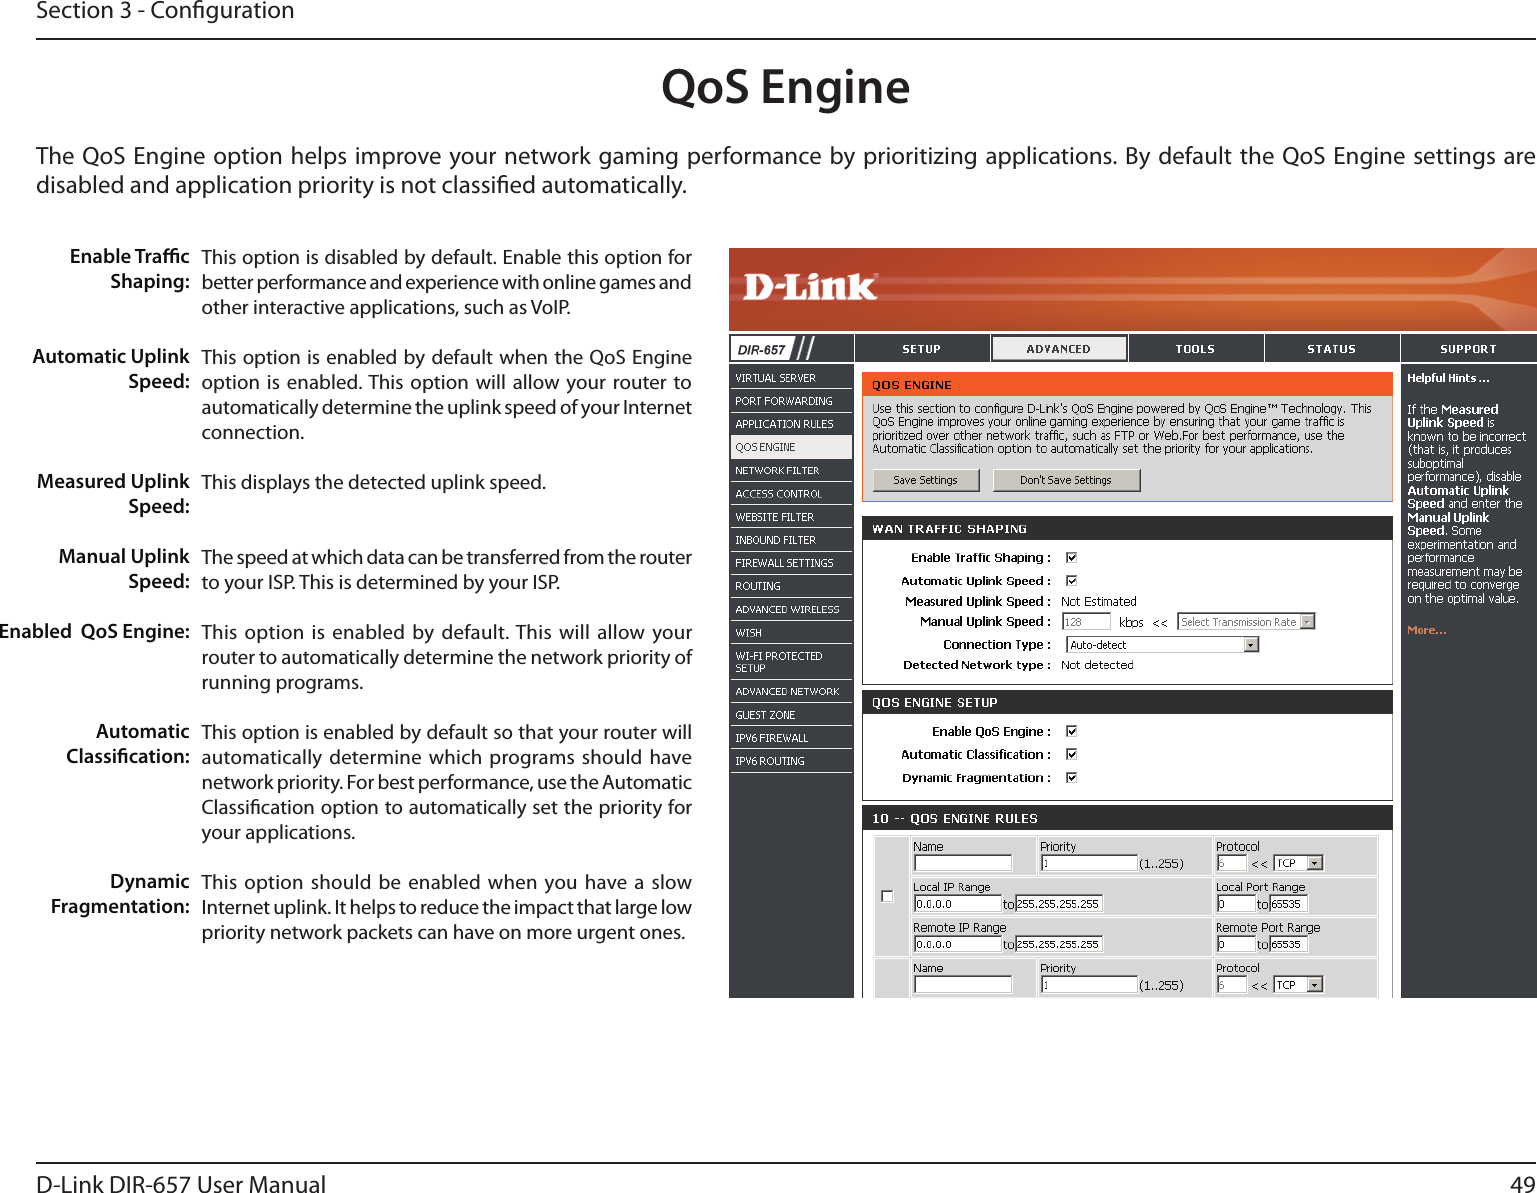 49D-Link DIR-657 User ManualSection 3 - CongurationQoS EngineThe QoS Engine option helps improve your network gaming performance by prioritizing applications. By default the QoS Engine settings are disabled and application priority is not classied automatically.This option is disabled by default. Enable this option for better performance and experience with online games and other interactive applications, such as VoIP.This option is enabled by default when the QoS Engine option is enabled. This  option will allow  your router to automatically determine the uplink speed of your Internet connection.This displays the detected uplink speed.The speed at which data can be transferred from the router to your ISP. This is determined by your ISP. This option  is enabled by default. This  will allow your router to automatically determine the network priority of running programs.This option is enabled by default so that your router will automatically determine  which programs should have network priority. For best performance, use the Automatic Classication option to automatically set the priority for your applications.This option  should be enabled when  you have  a  slow Internet uplink. It helps to reduce the impact that large low priority network packets can have on more urgent ones.Enable TracShaping:Automatic UplinkSpeed:Measured UplinkSpeed:Manual UplinkSpeed:Enabled  QoS Engine:Automatic Classication:Dynamic Fragmentation: